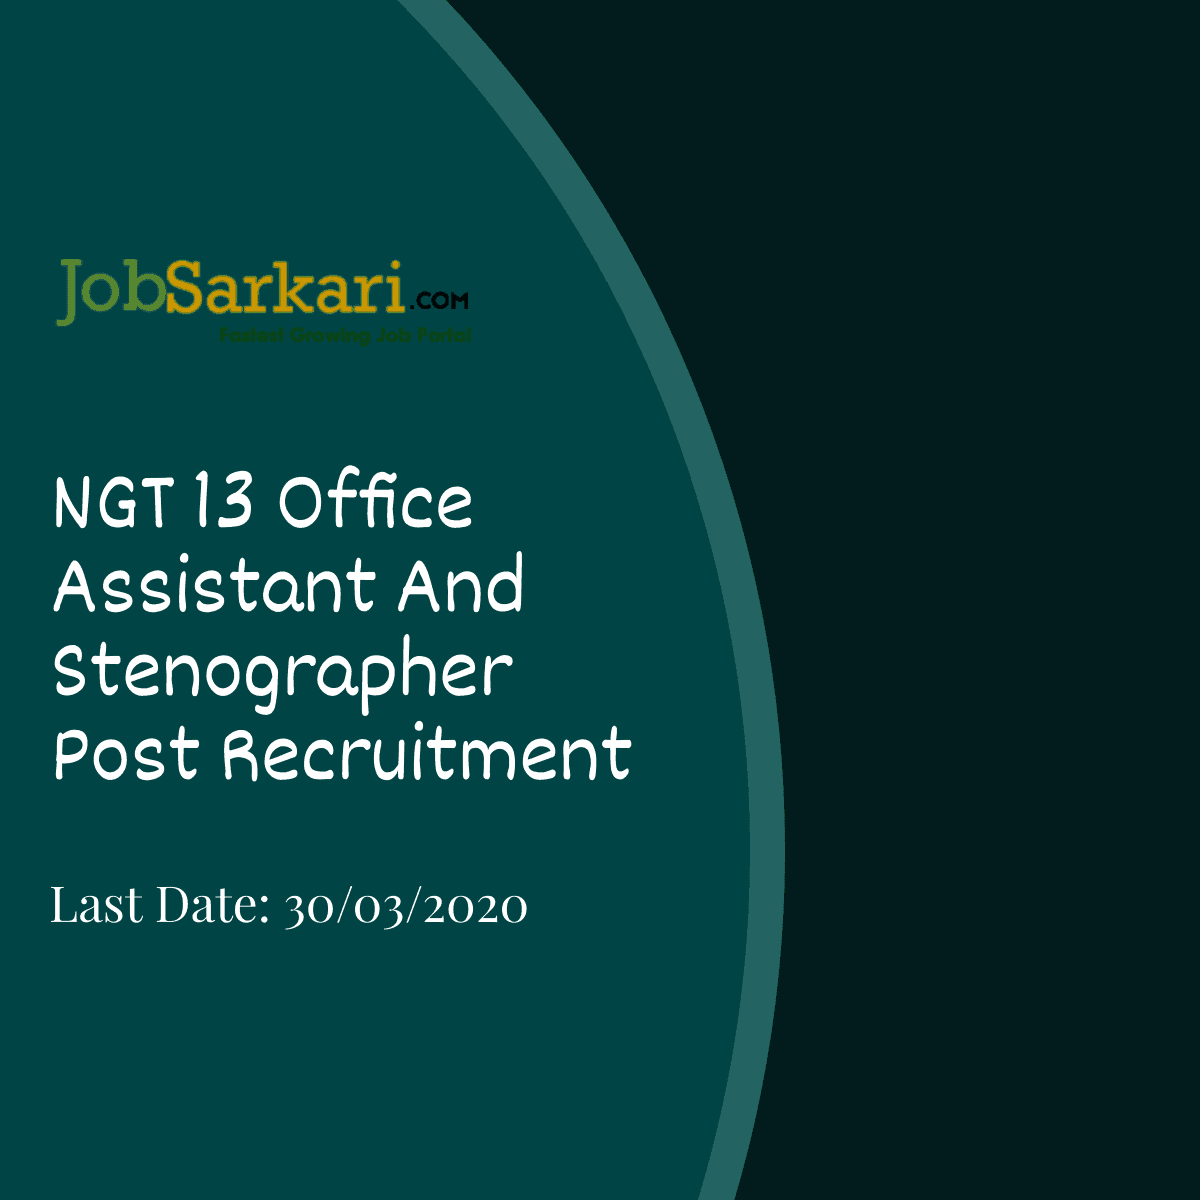 NGT Recruitment 2020 For Office Assistant And Stenographer Post